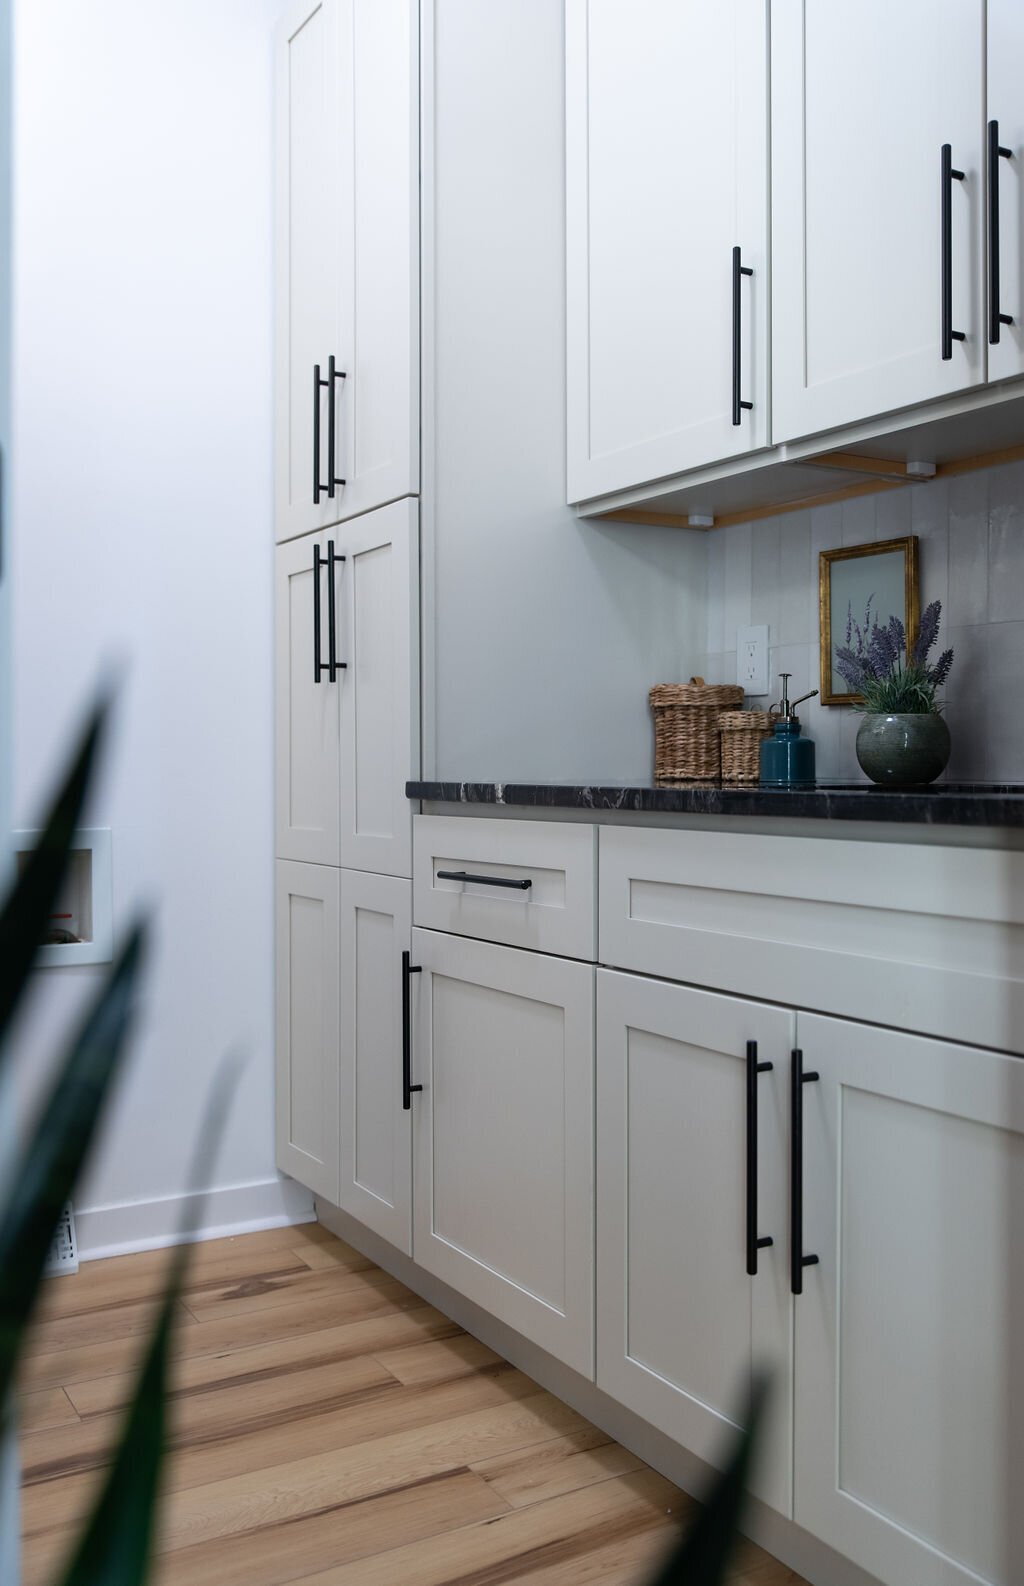 off-white cabinets with black handles in a laundry room